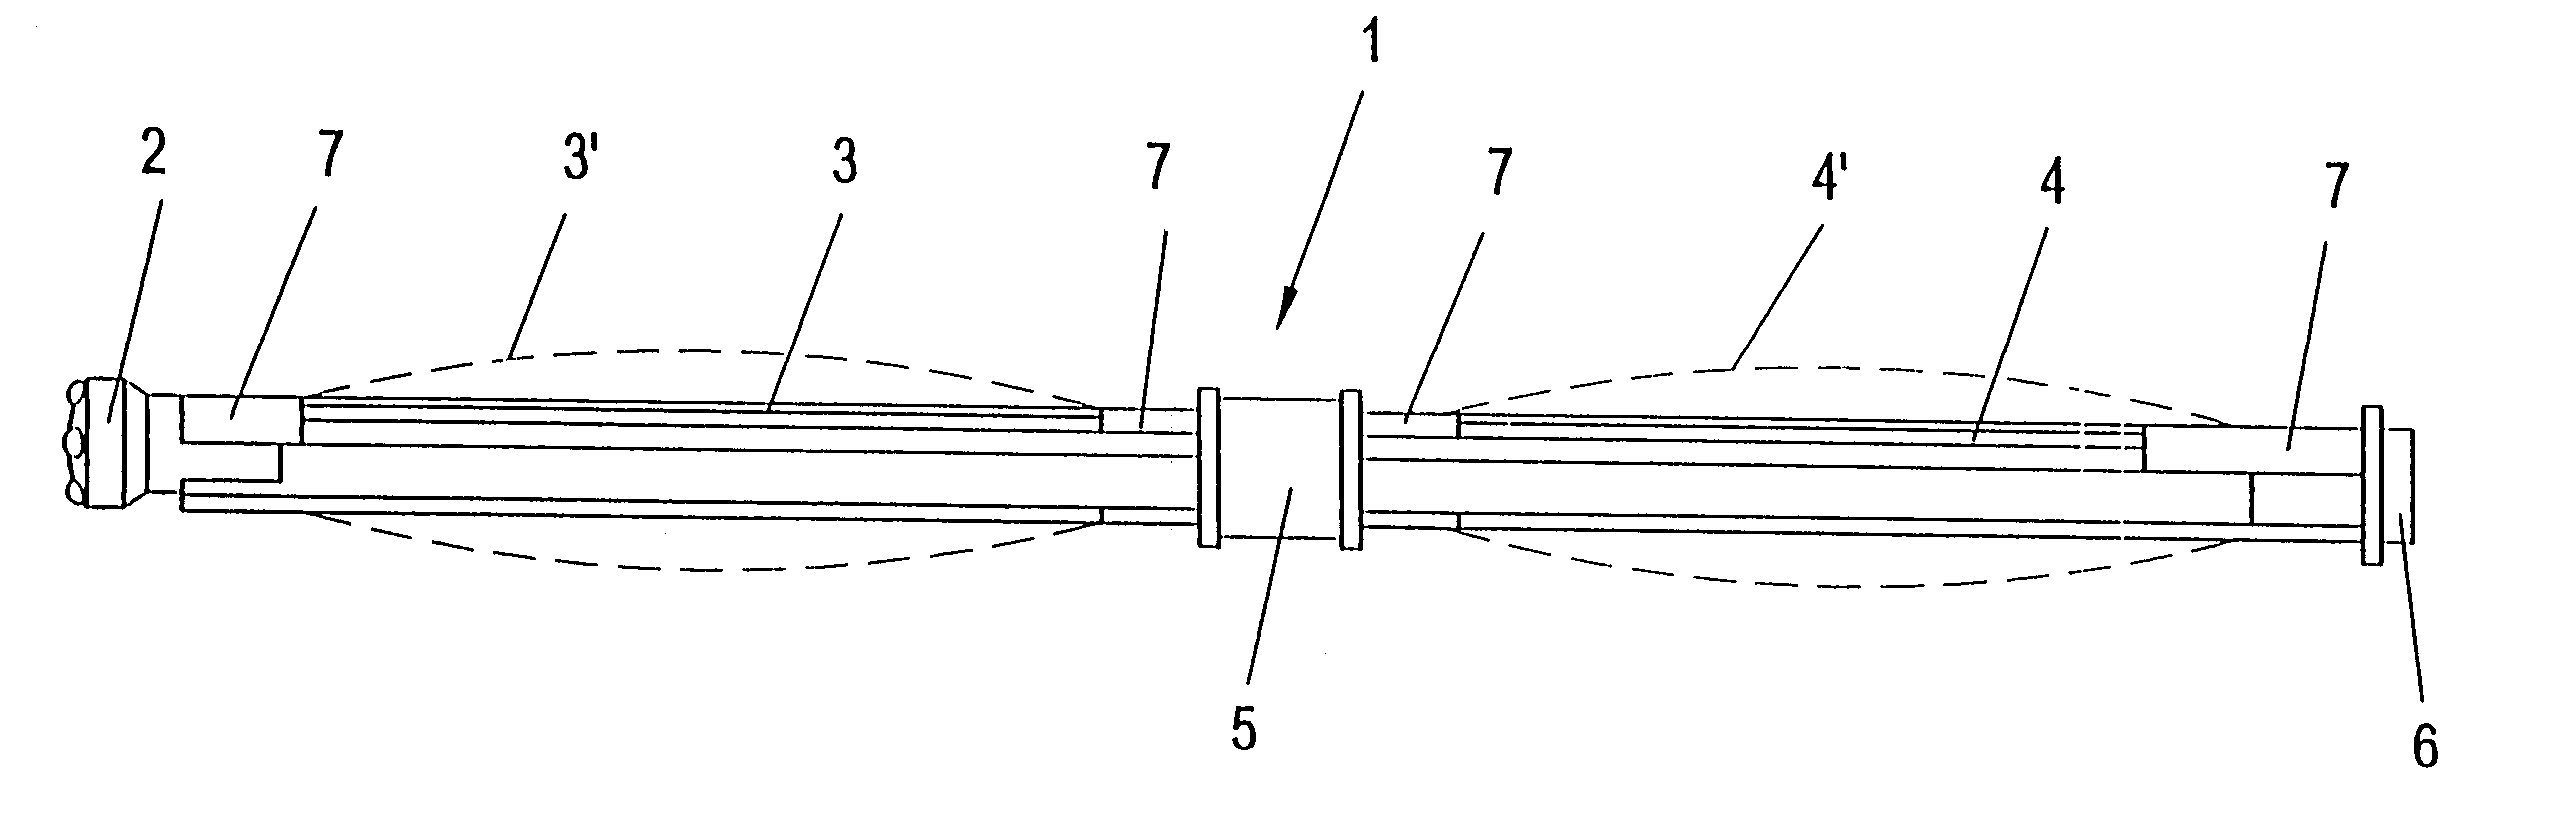 Rock bolts with expandable element